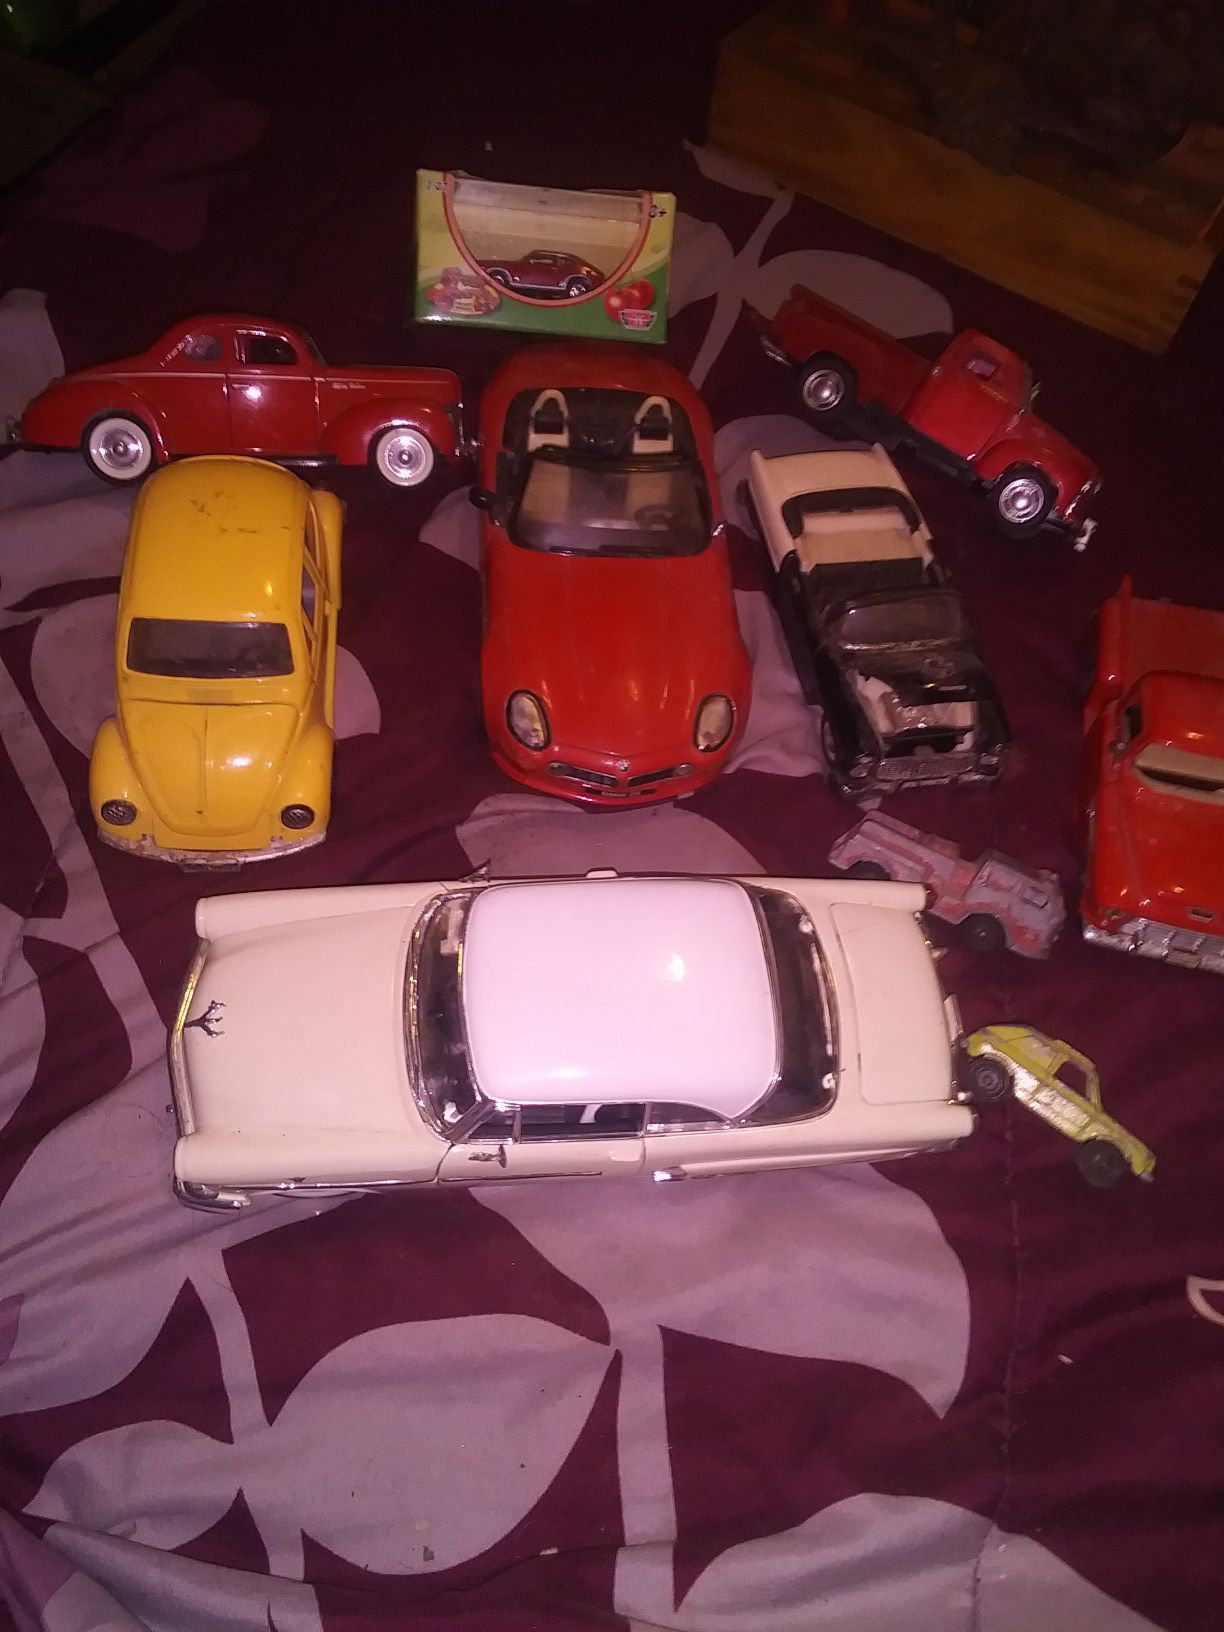 Old model cars for spacing